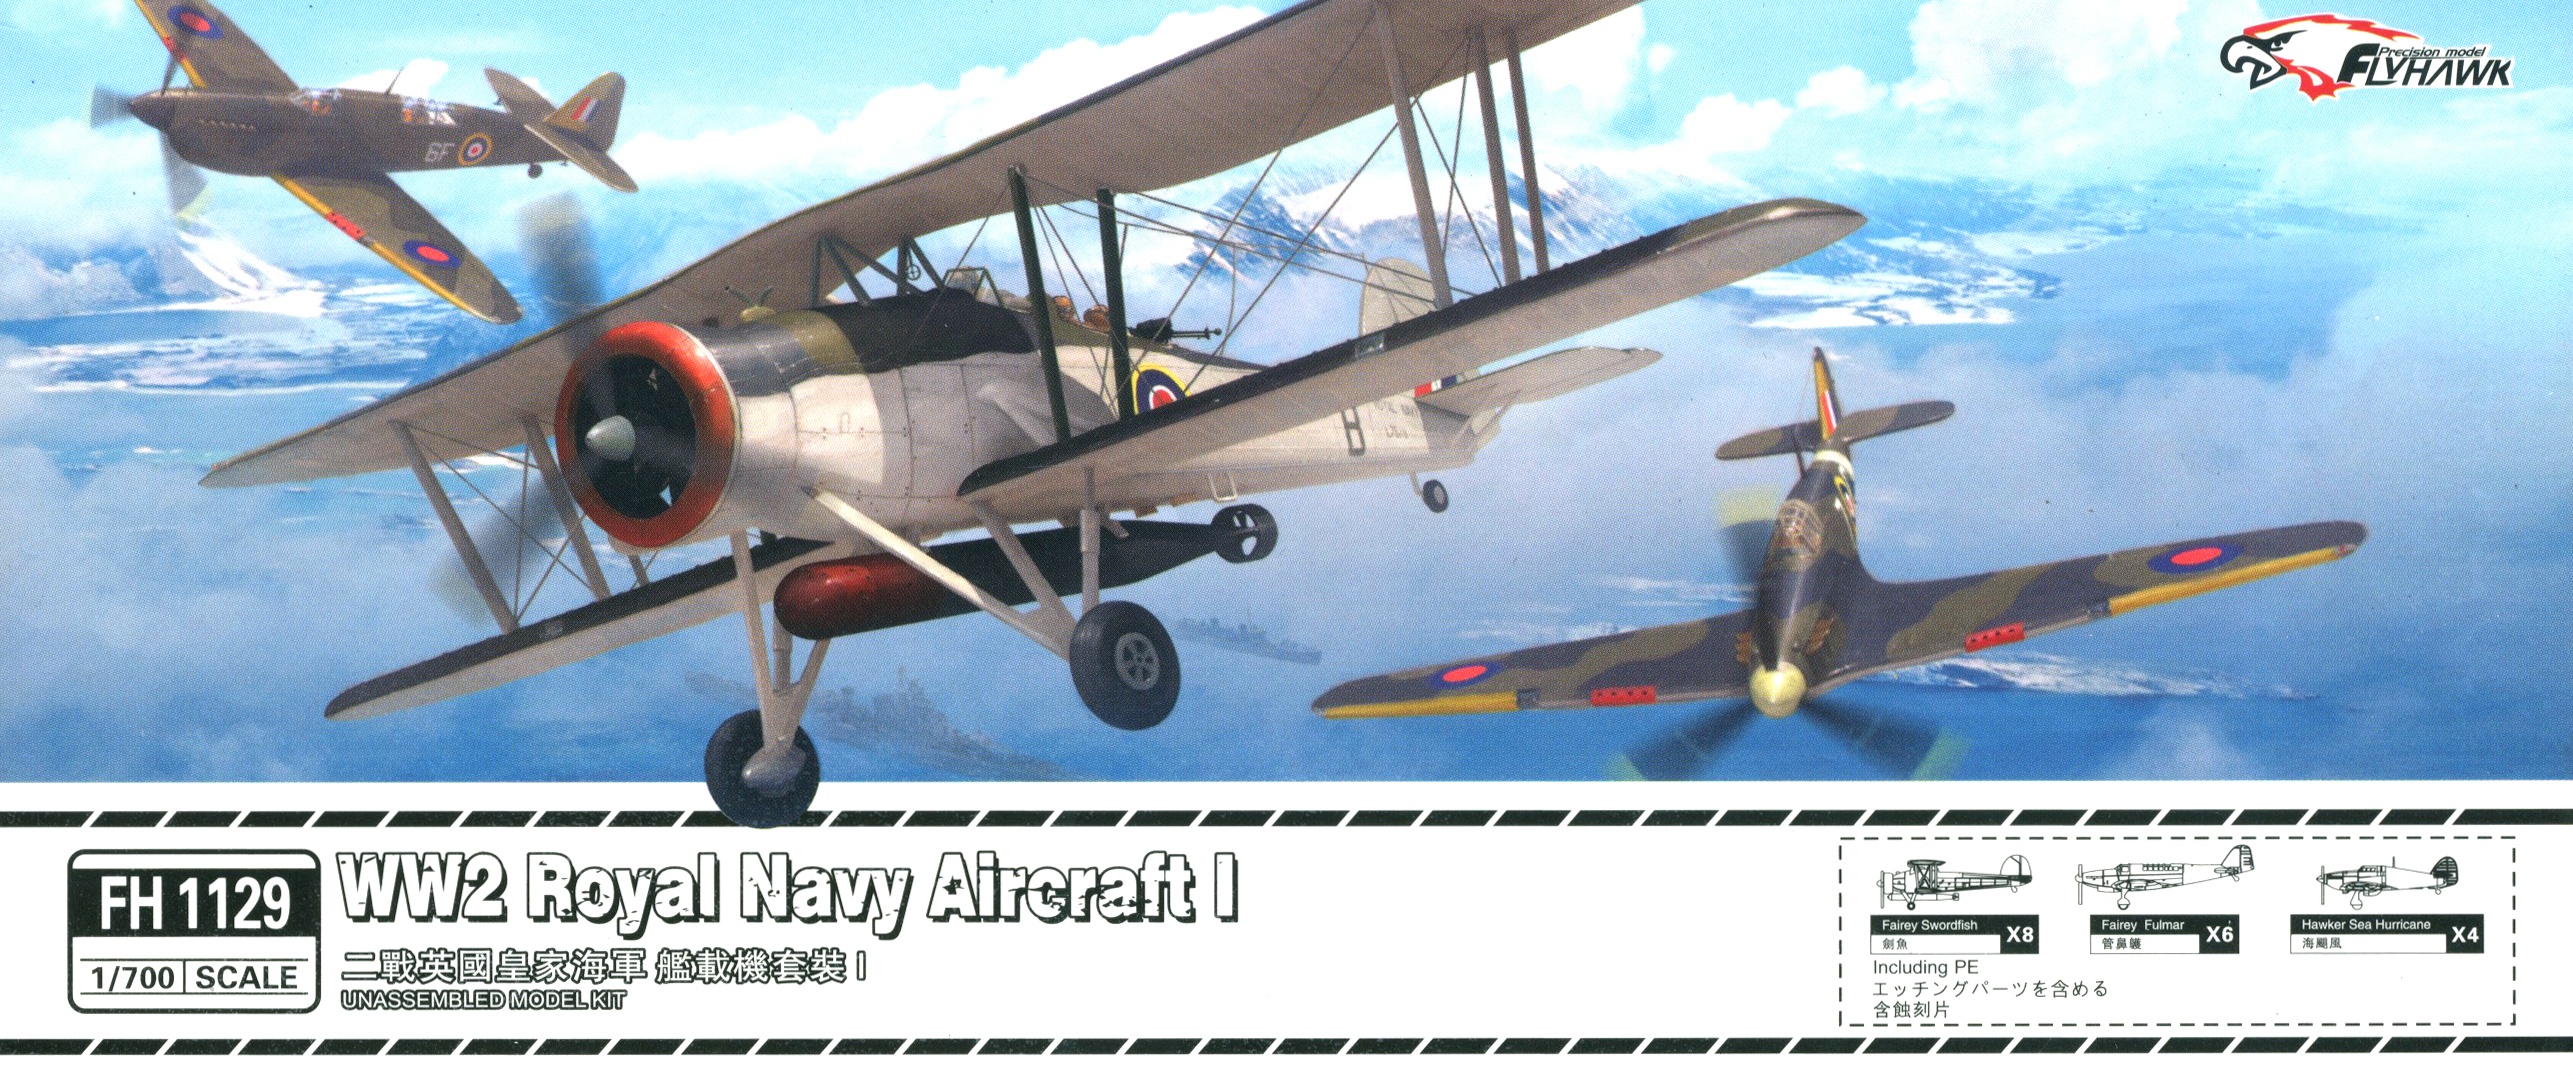 Flyhawk 1/700 FH1171 WWII Royal Navy Aircraft III for sale online 